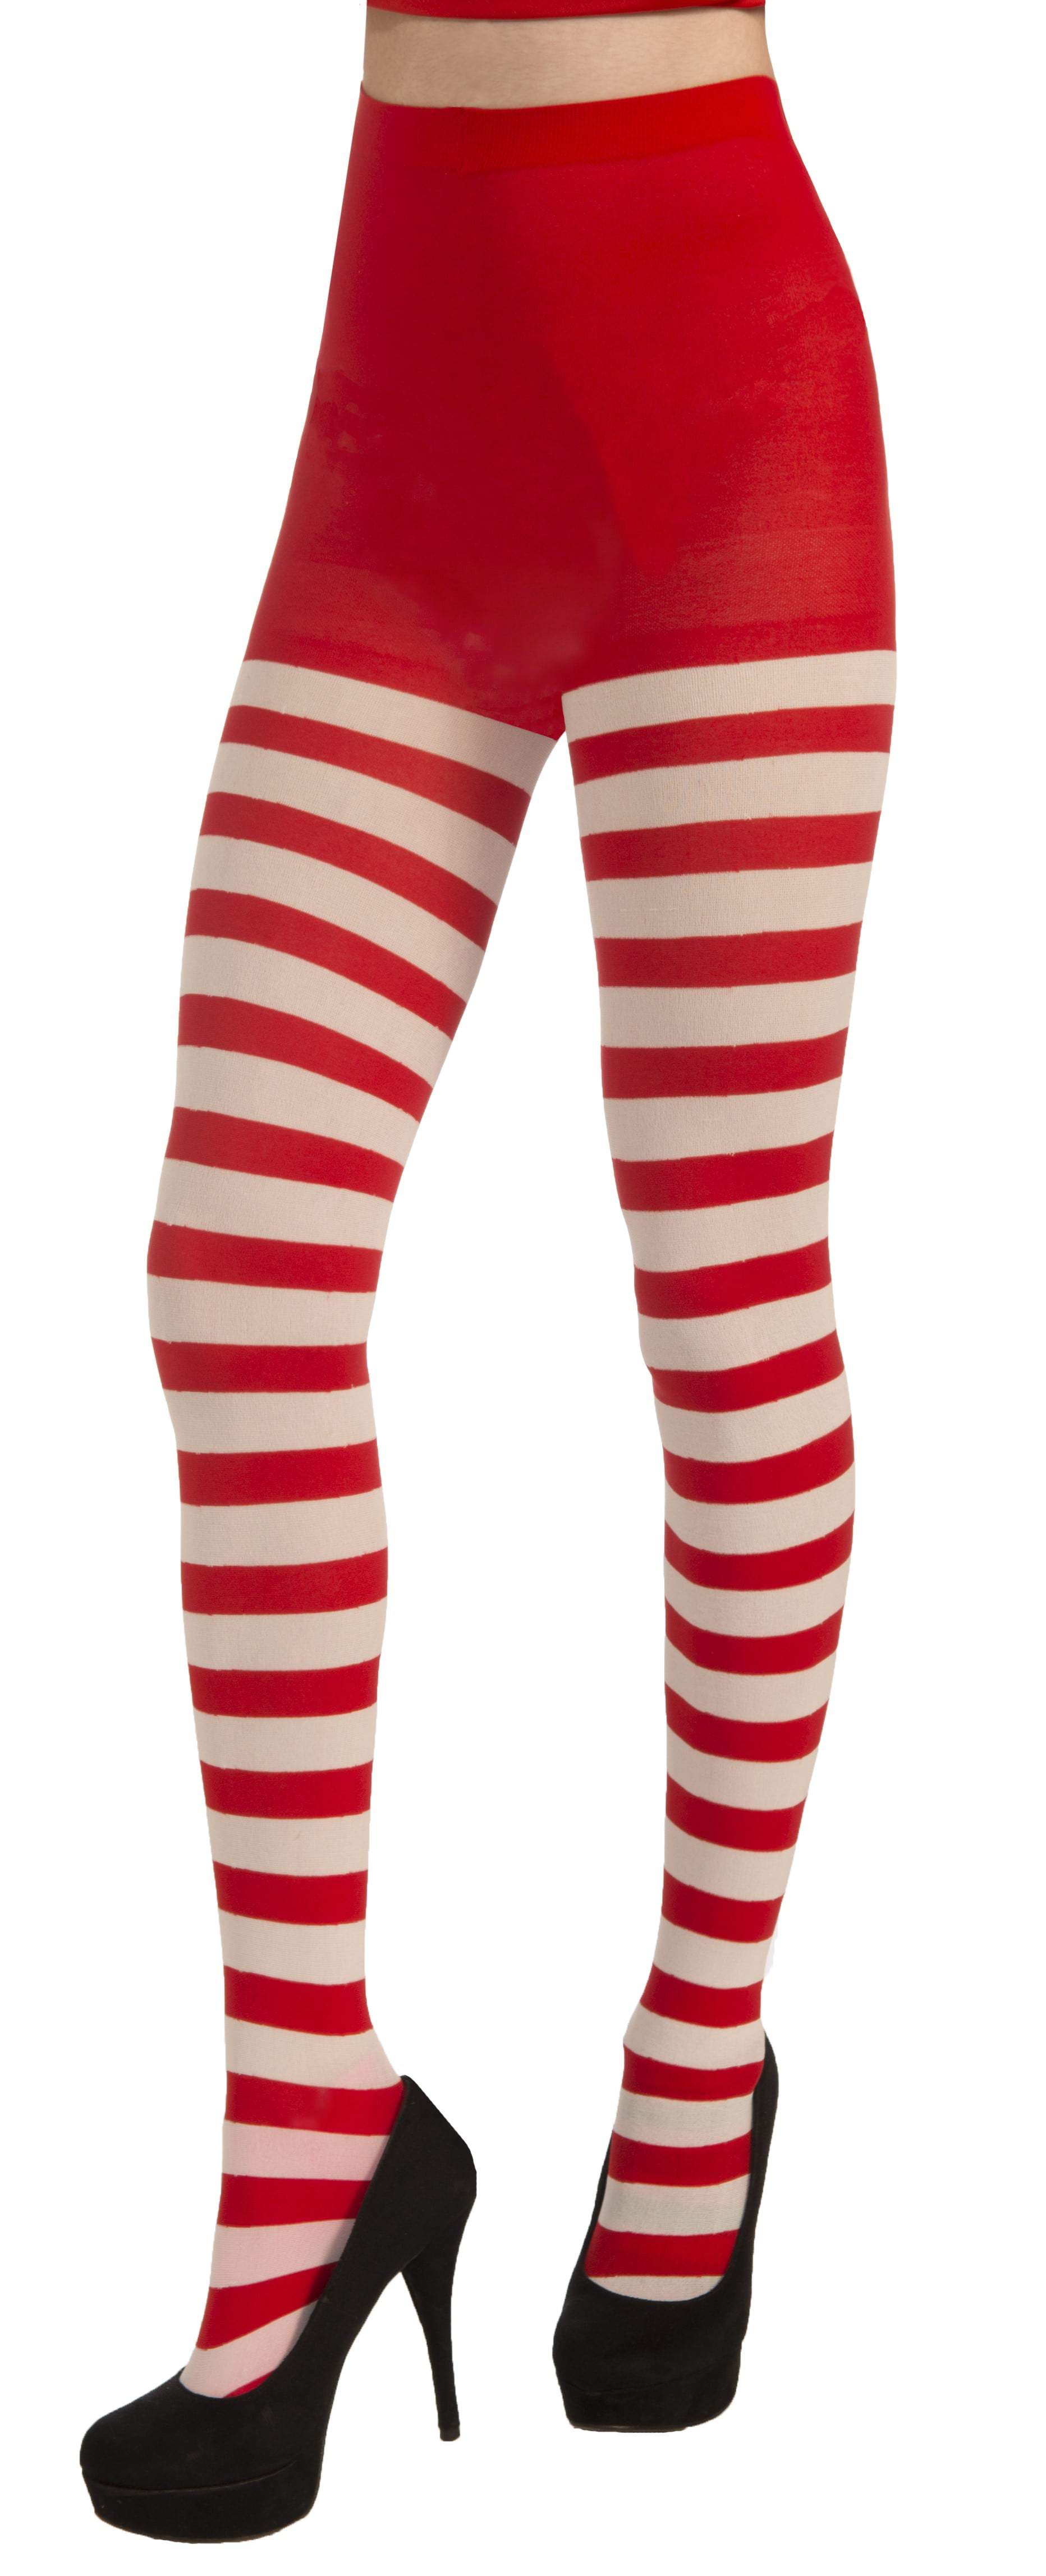 White Red Striped Stockings Tights Elf Christmas Costume Accessory Women Hosiery Walmart Canada